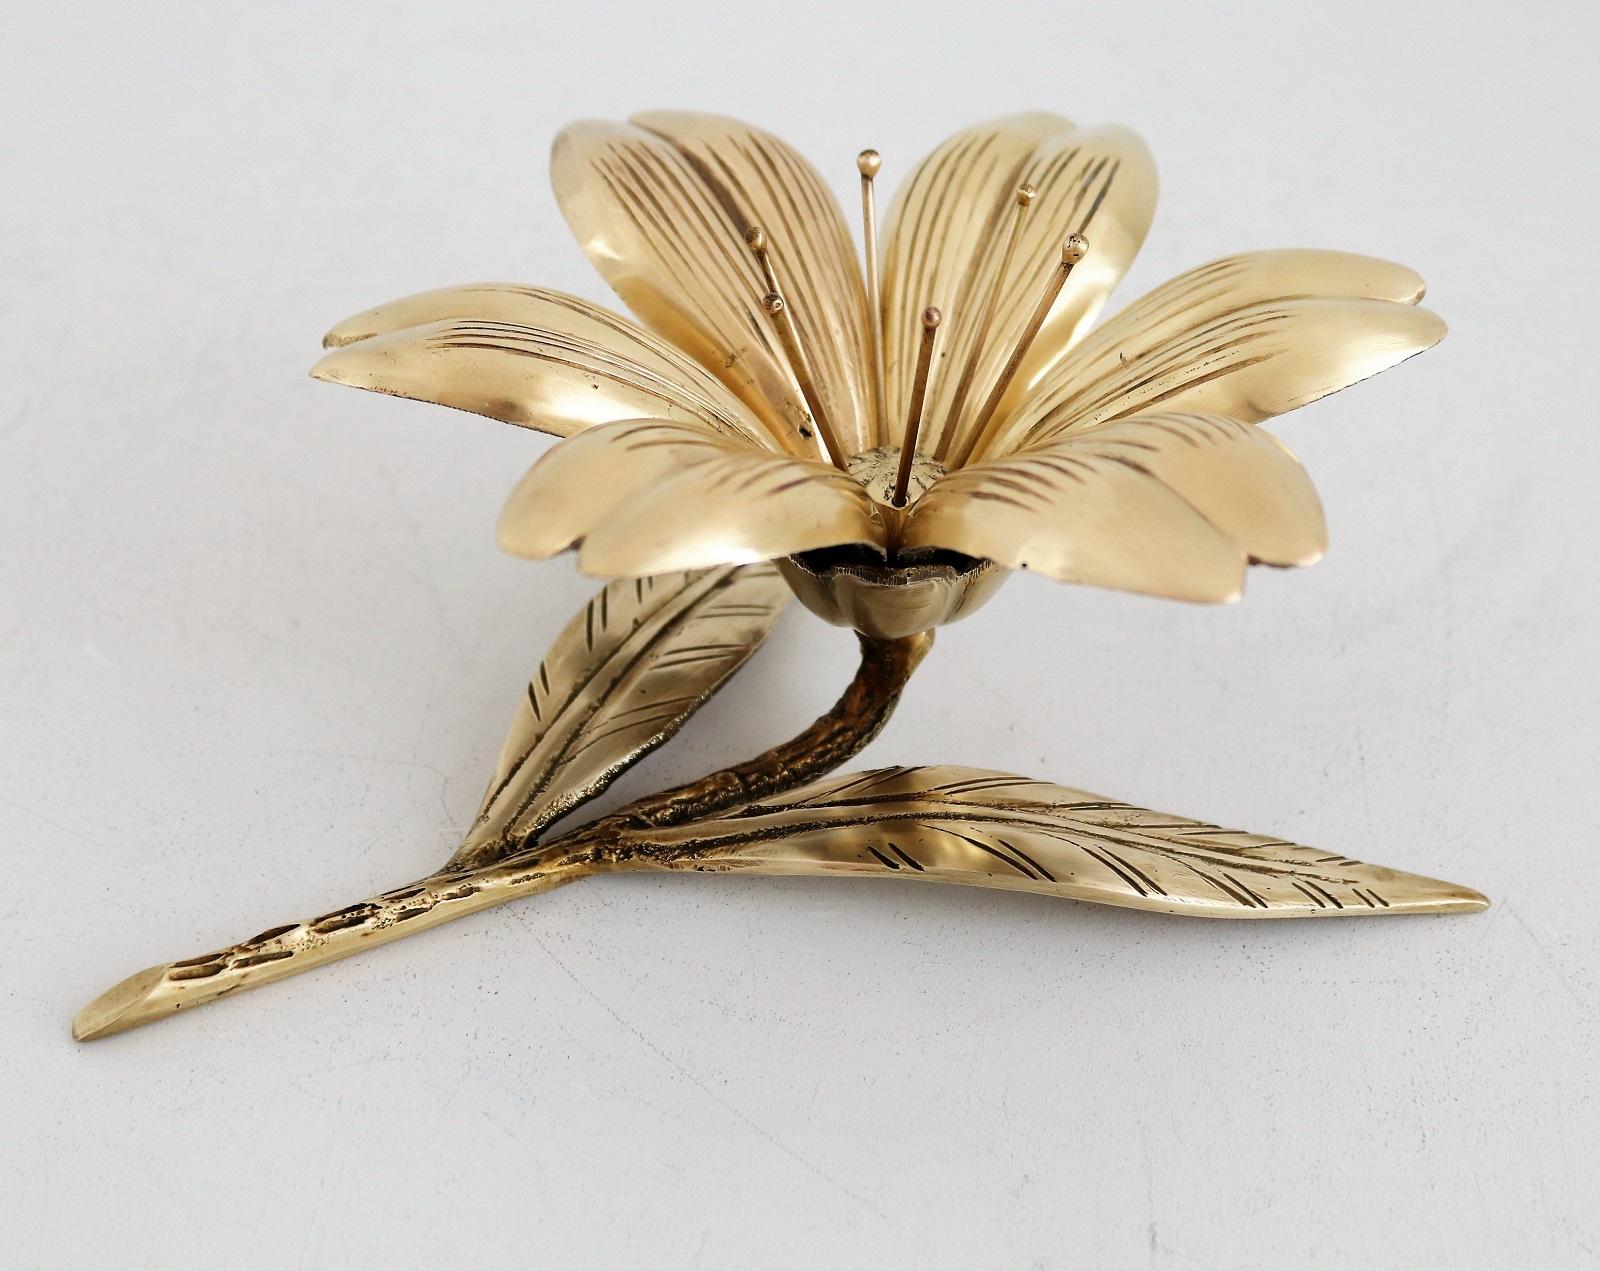 Italian Midcentury Flower in Brass with Petal Ashtrays for Cigarettes, 1950s 4